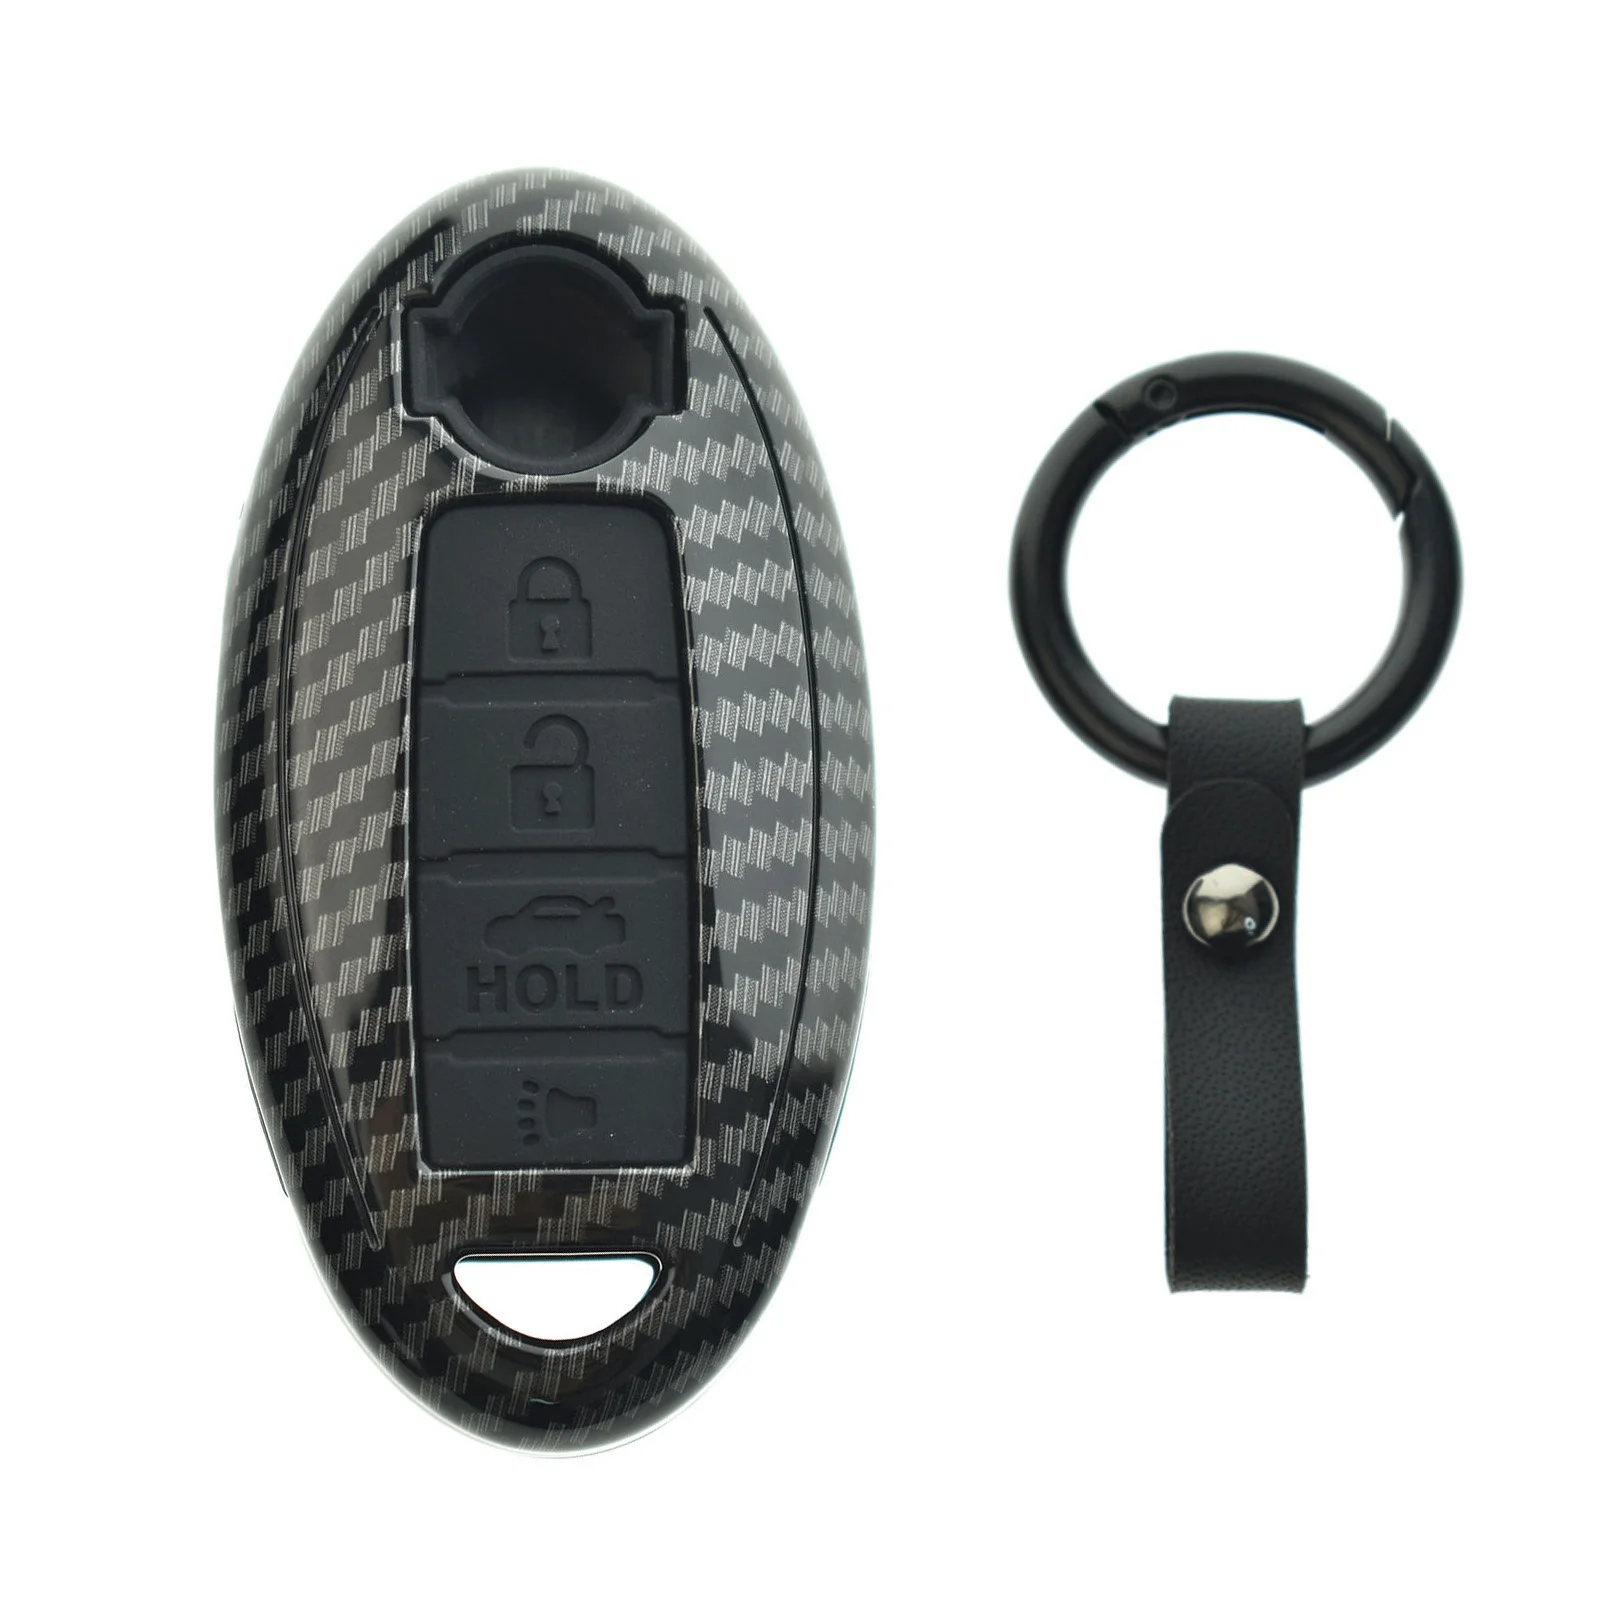 ABS Carbon Keychains Car Key Fob Cover Case Fit For Nissan Infiniti Accessories 